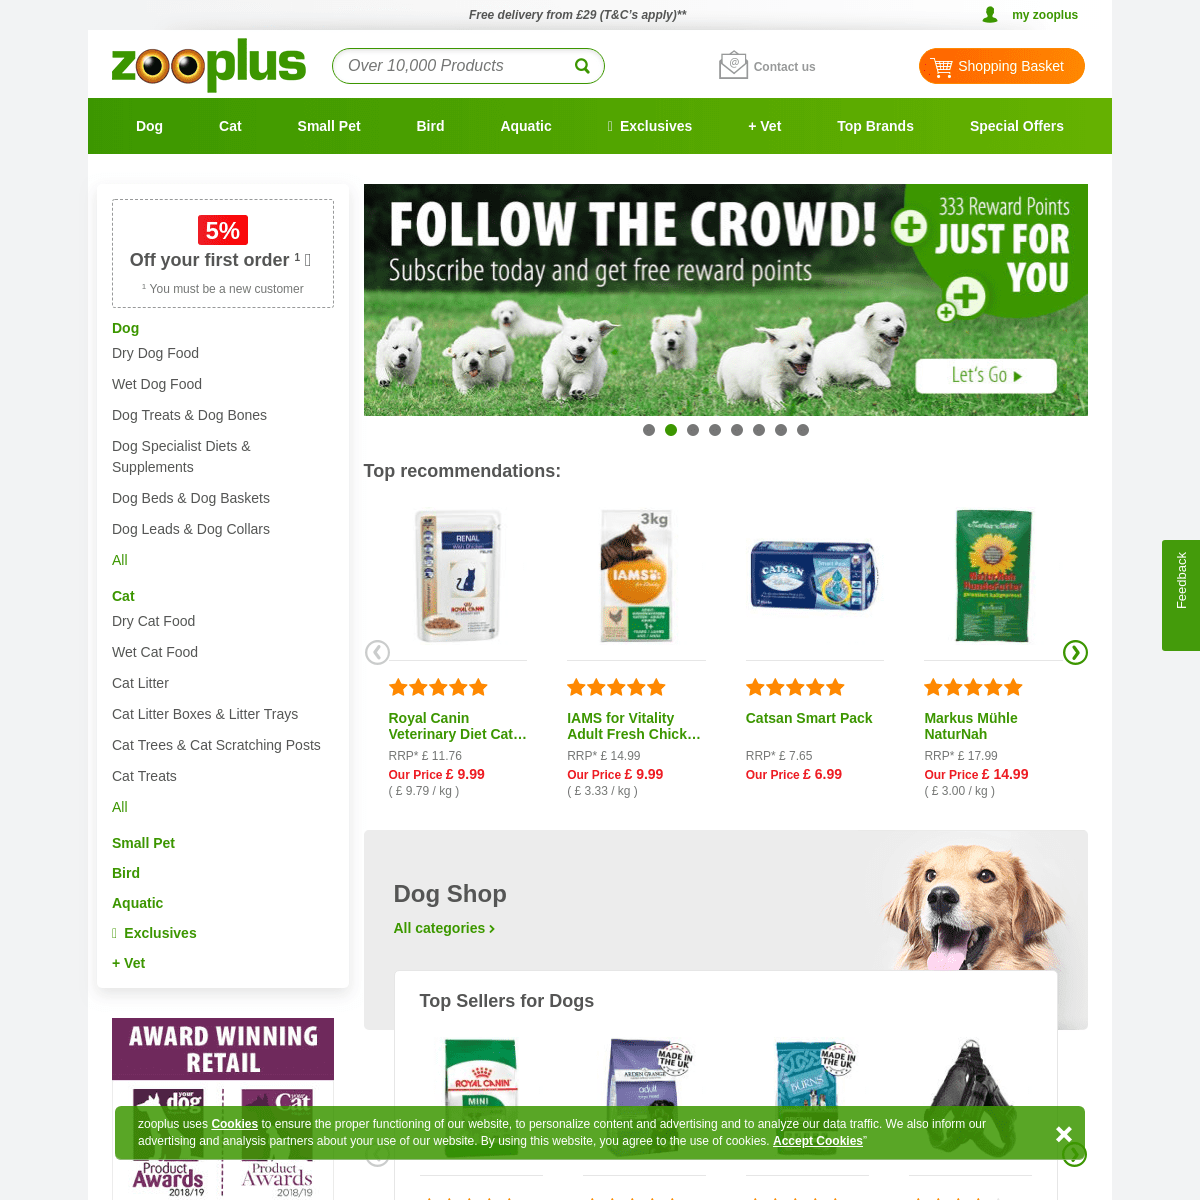 A complete backup of zooplus.co.uk